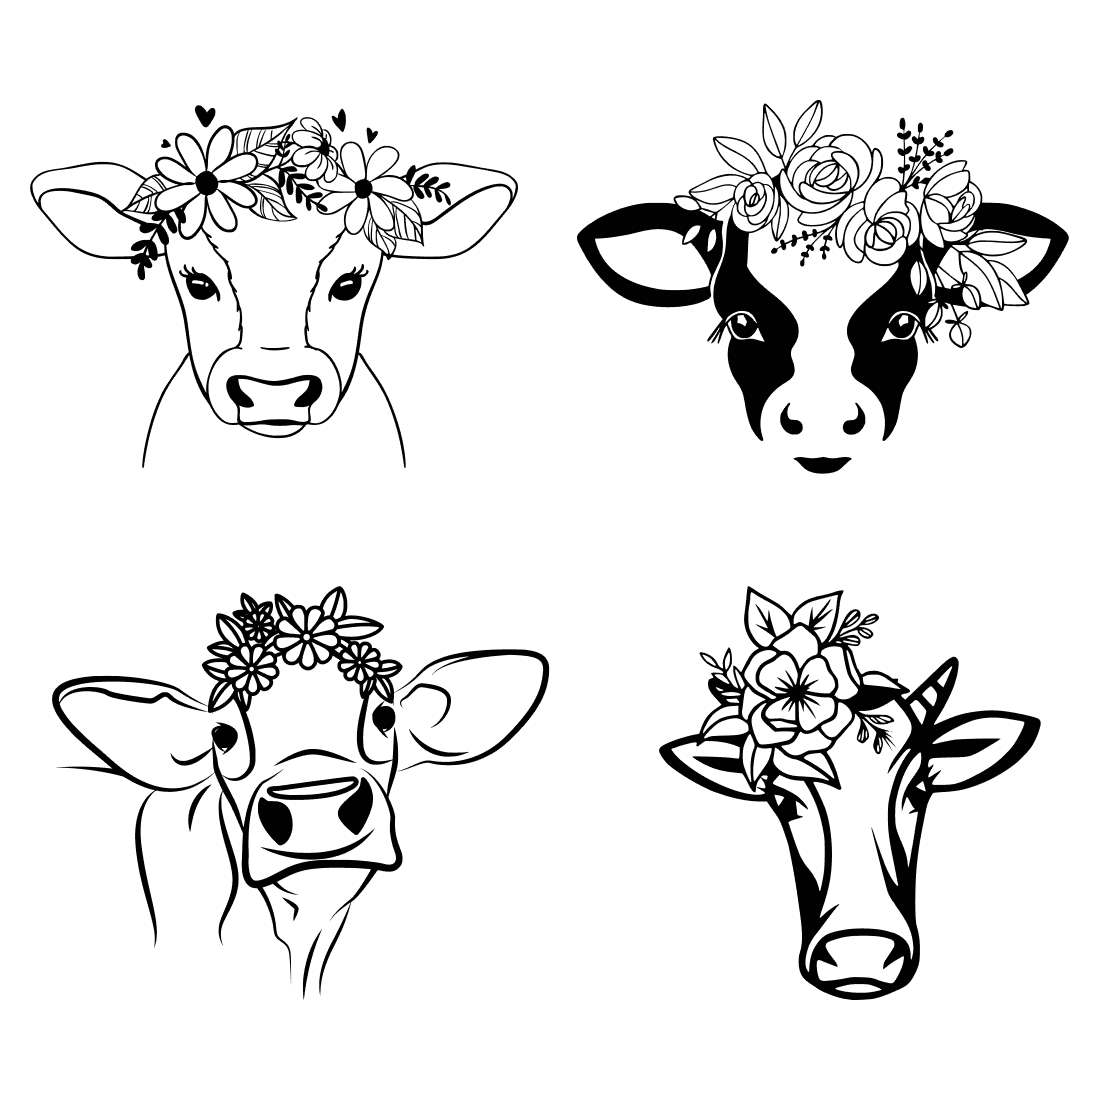 Four cows with flowers on their heads.